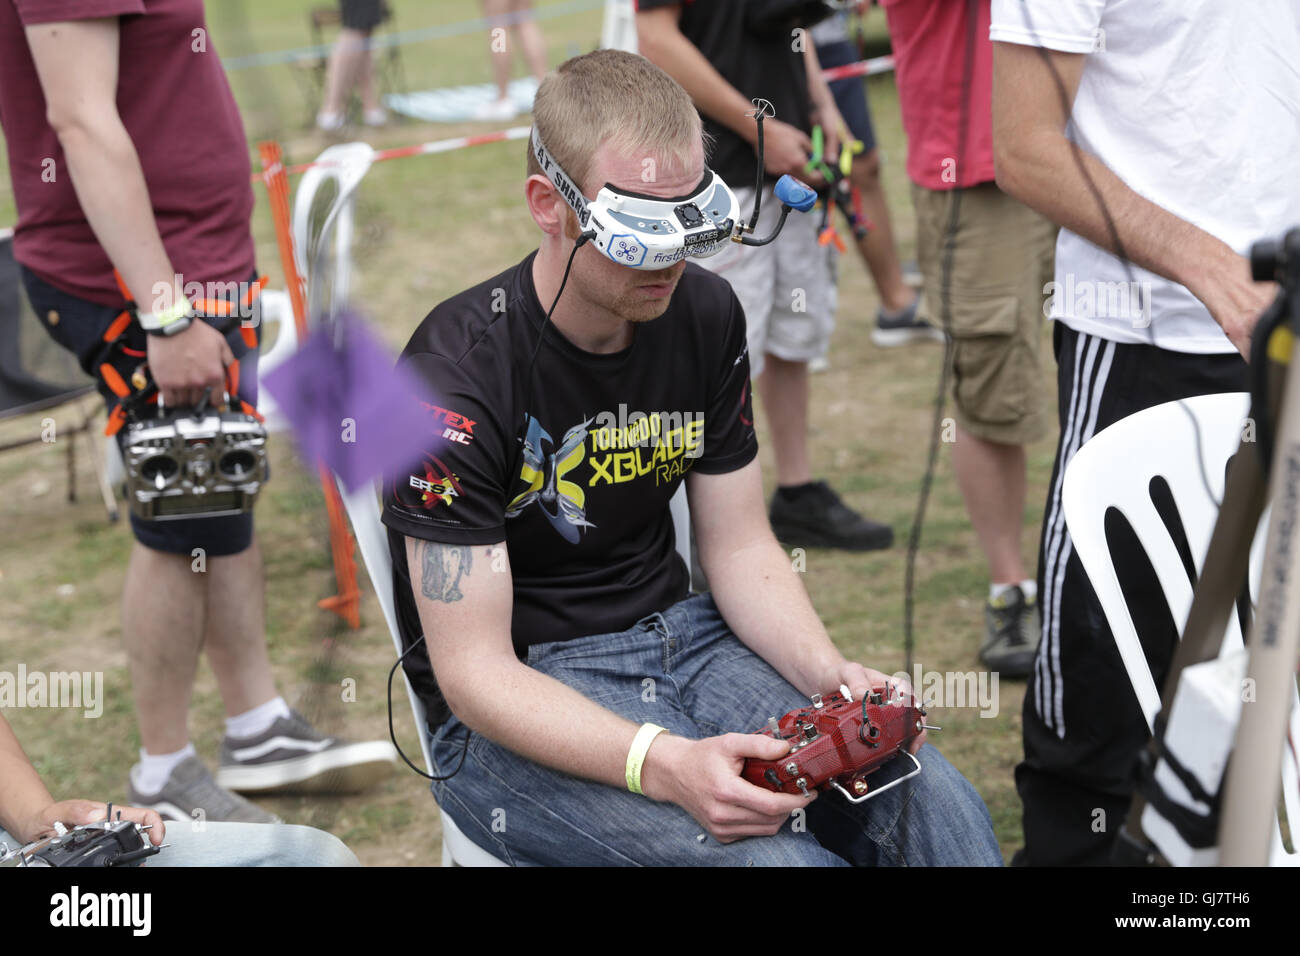 Drone Racing Queen's Cup 2016. Pilot James Bowles, also know as Jab1a at the UK drone racing competition. Stock Photo